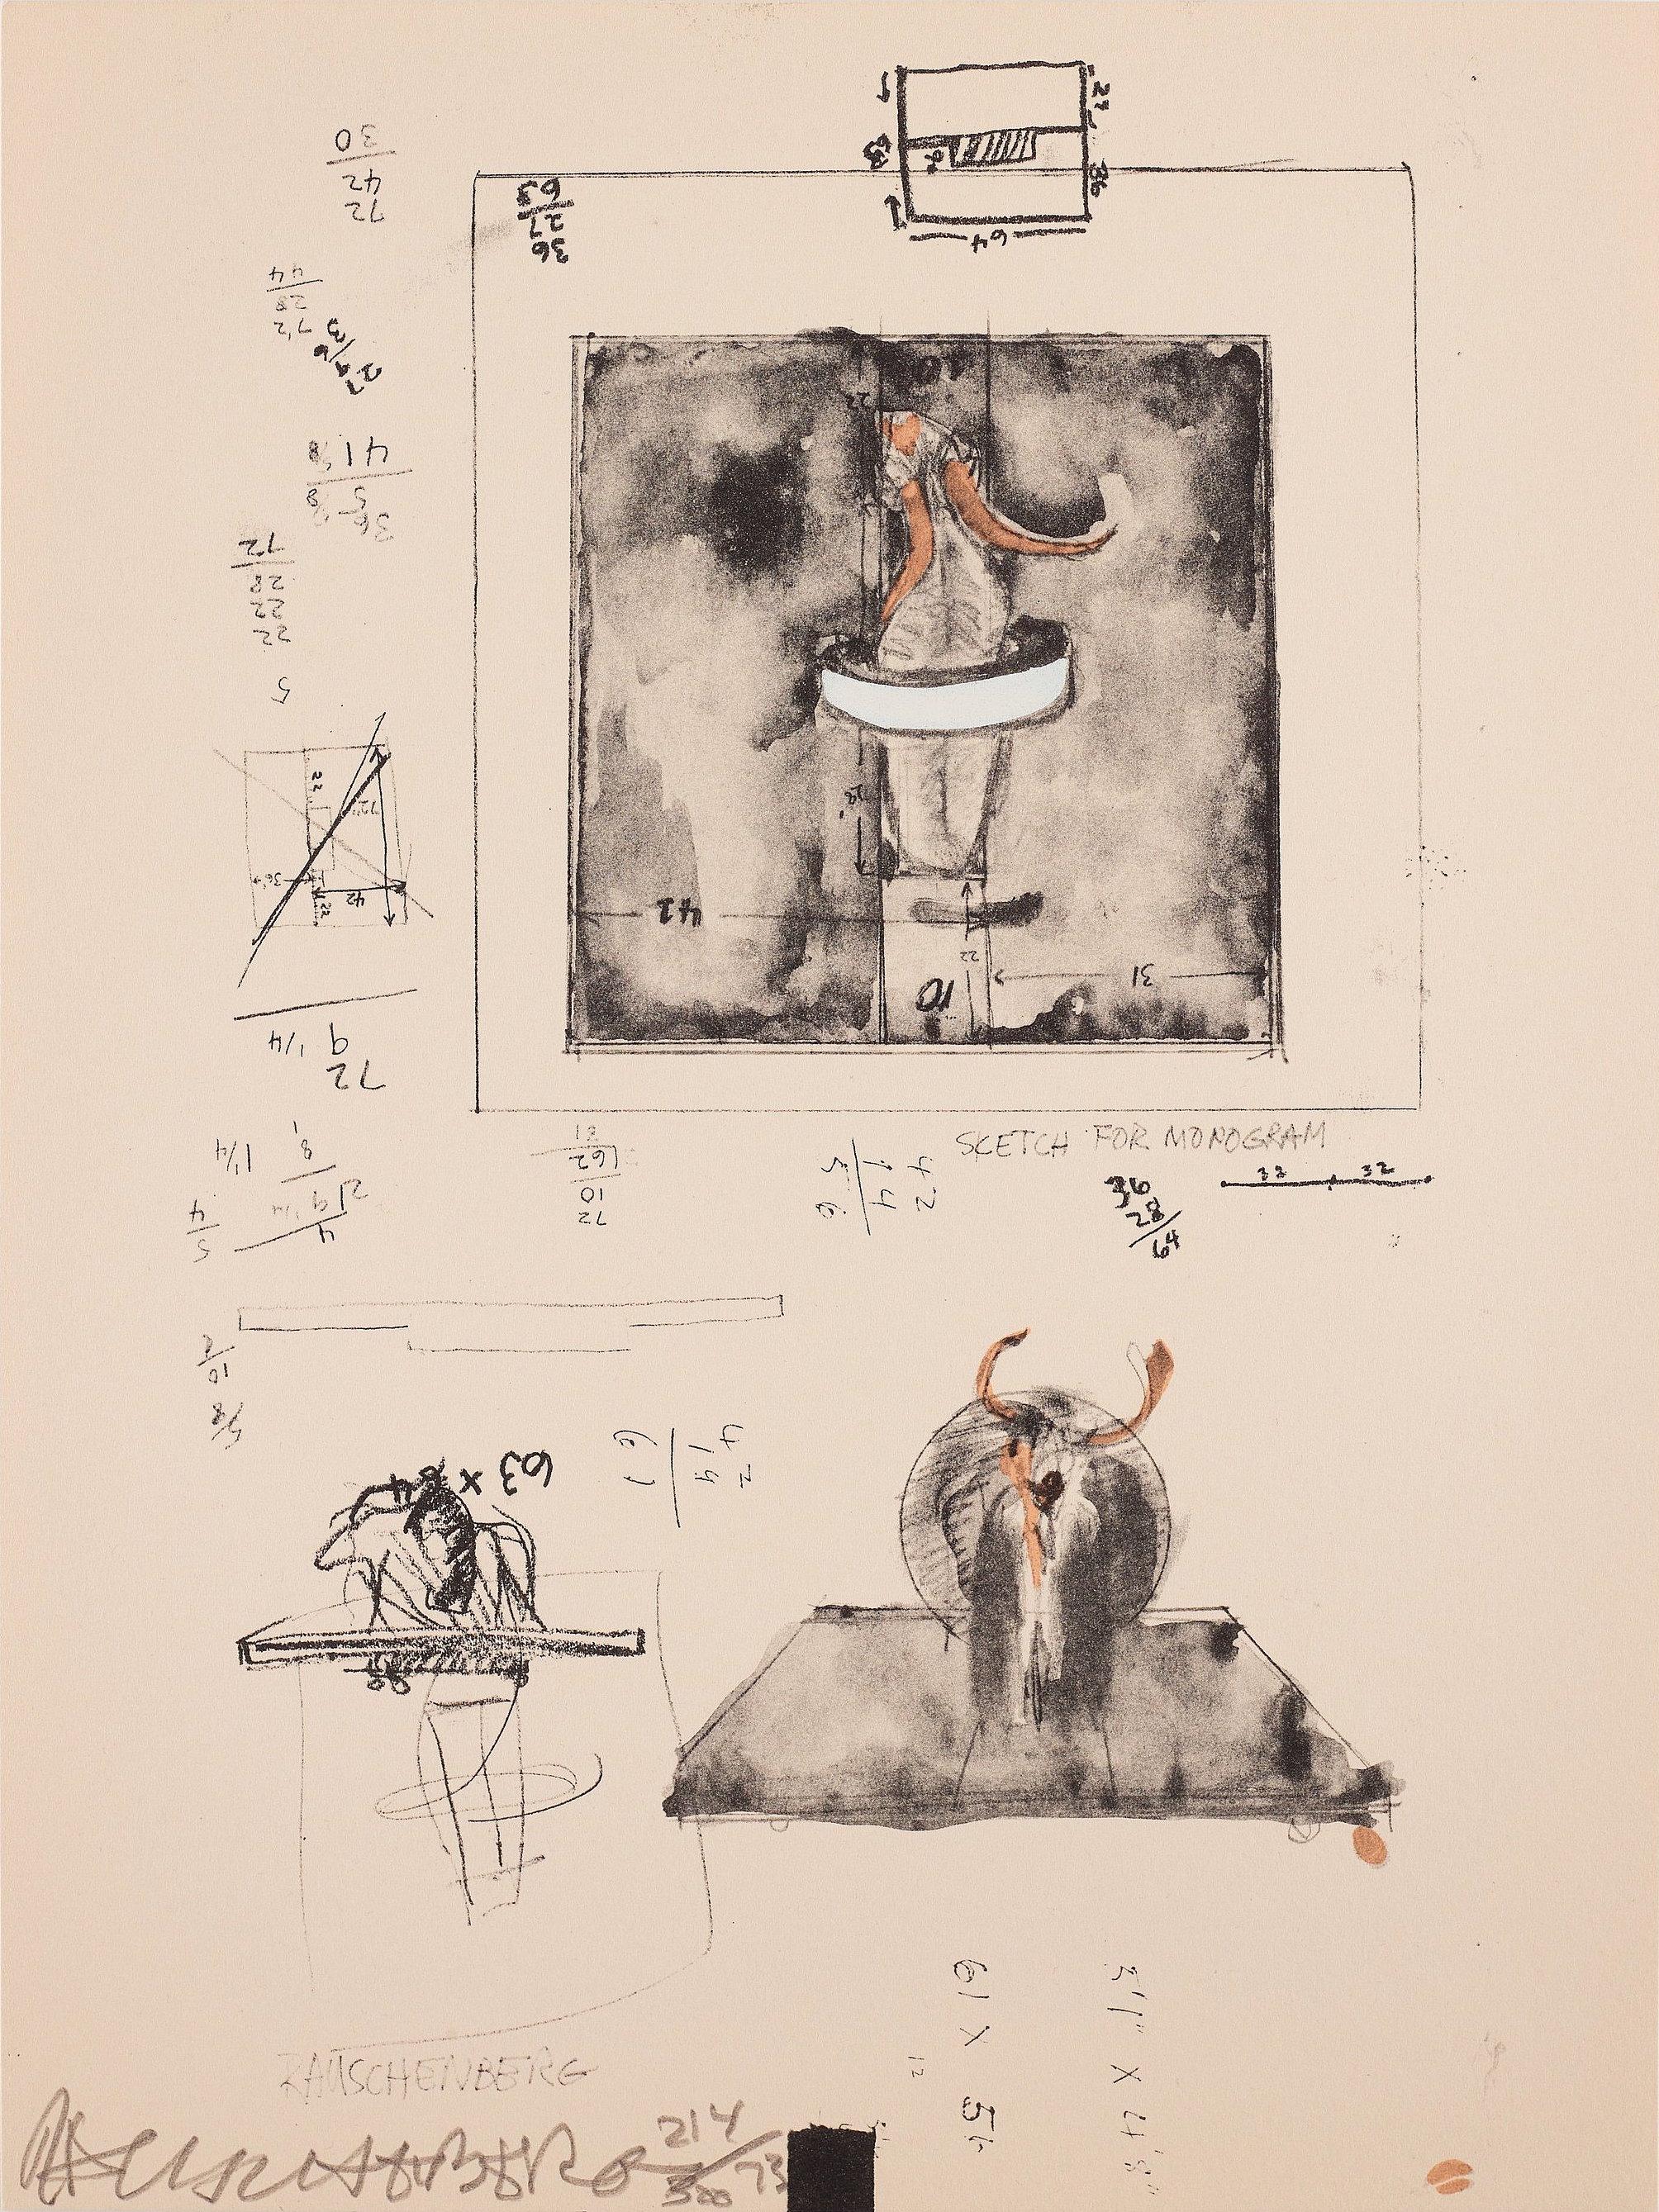 Robert Rauschenberg
Untitled [Sketch for Monogram, 1959], 1973

Screenprint and lithograph in colours, on rag paper
Signed, dated and numbered from the edition of 300
With the artist's copyright inkstamp verso
From The New York Collection for